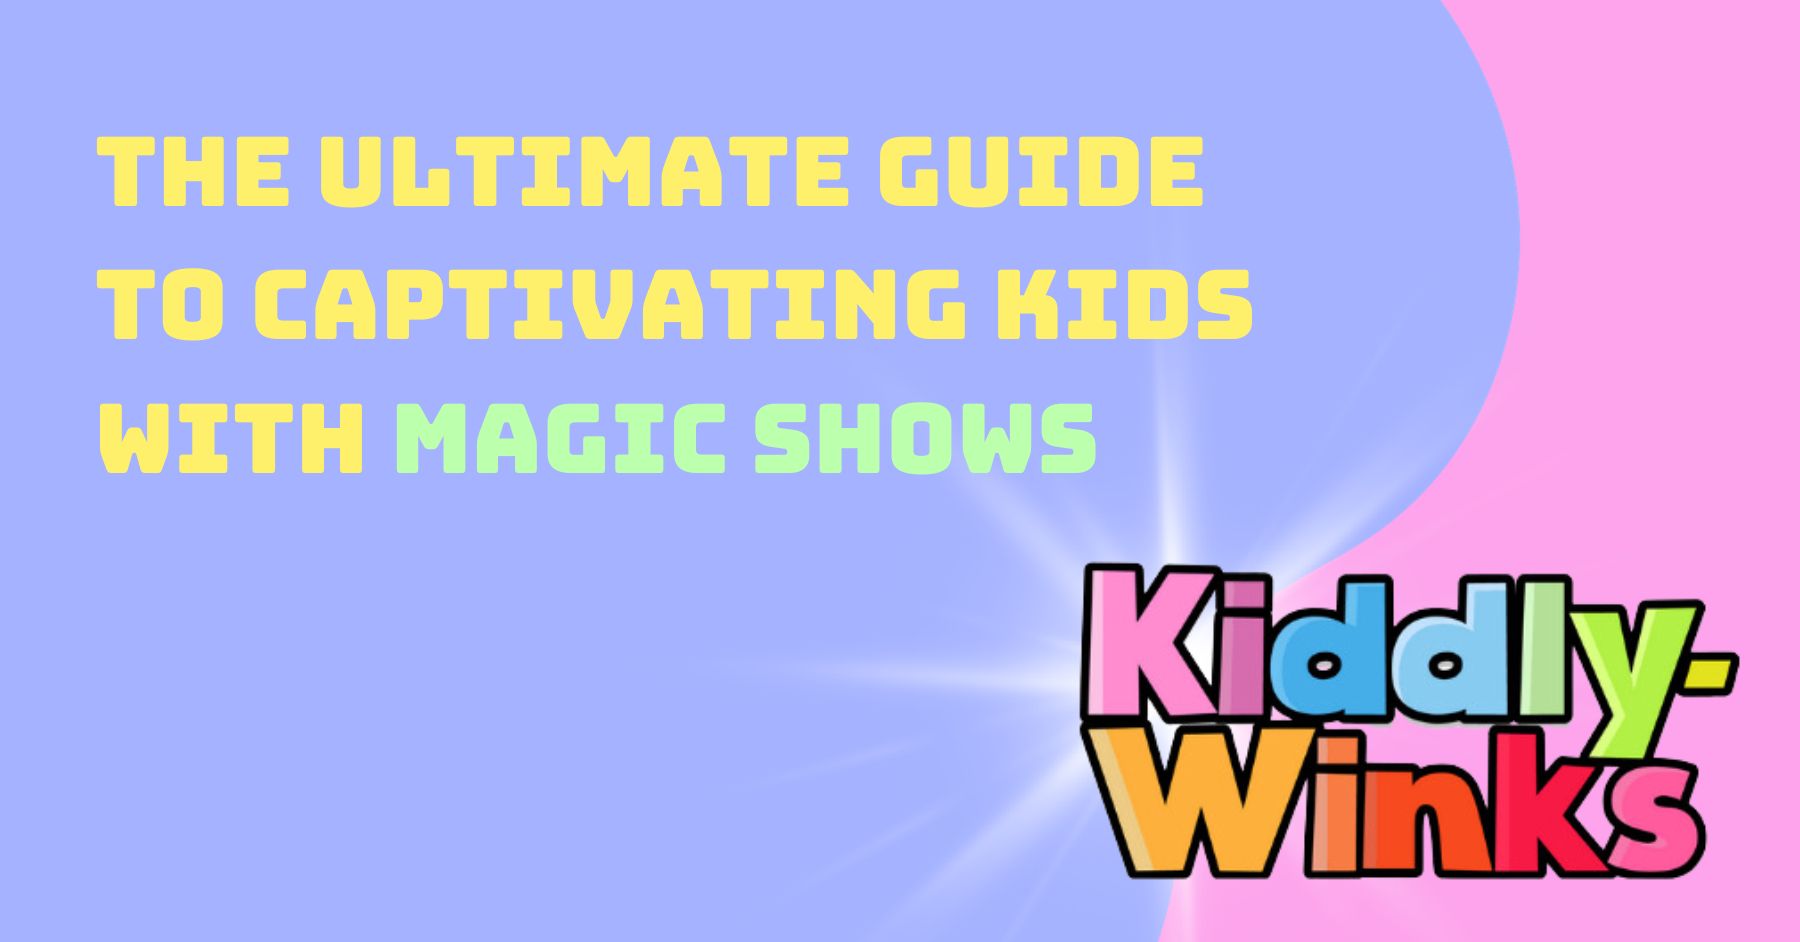 Captivating kids with magic shows